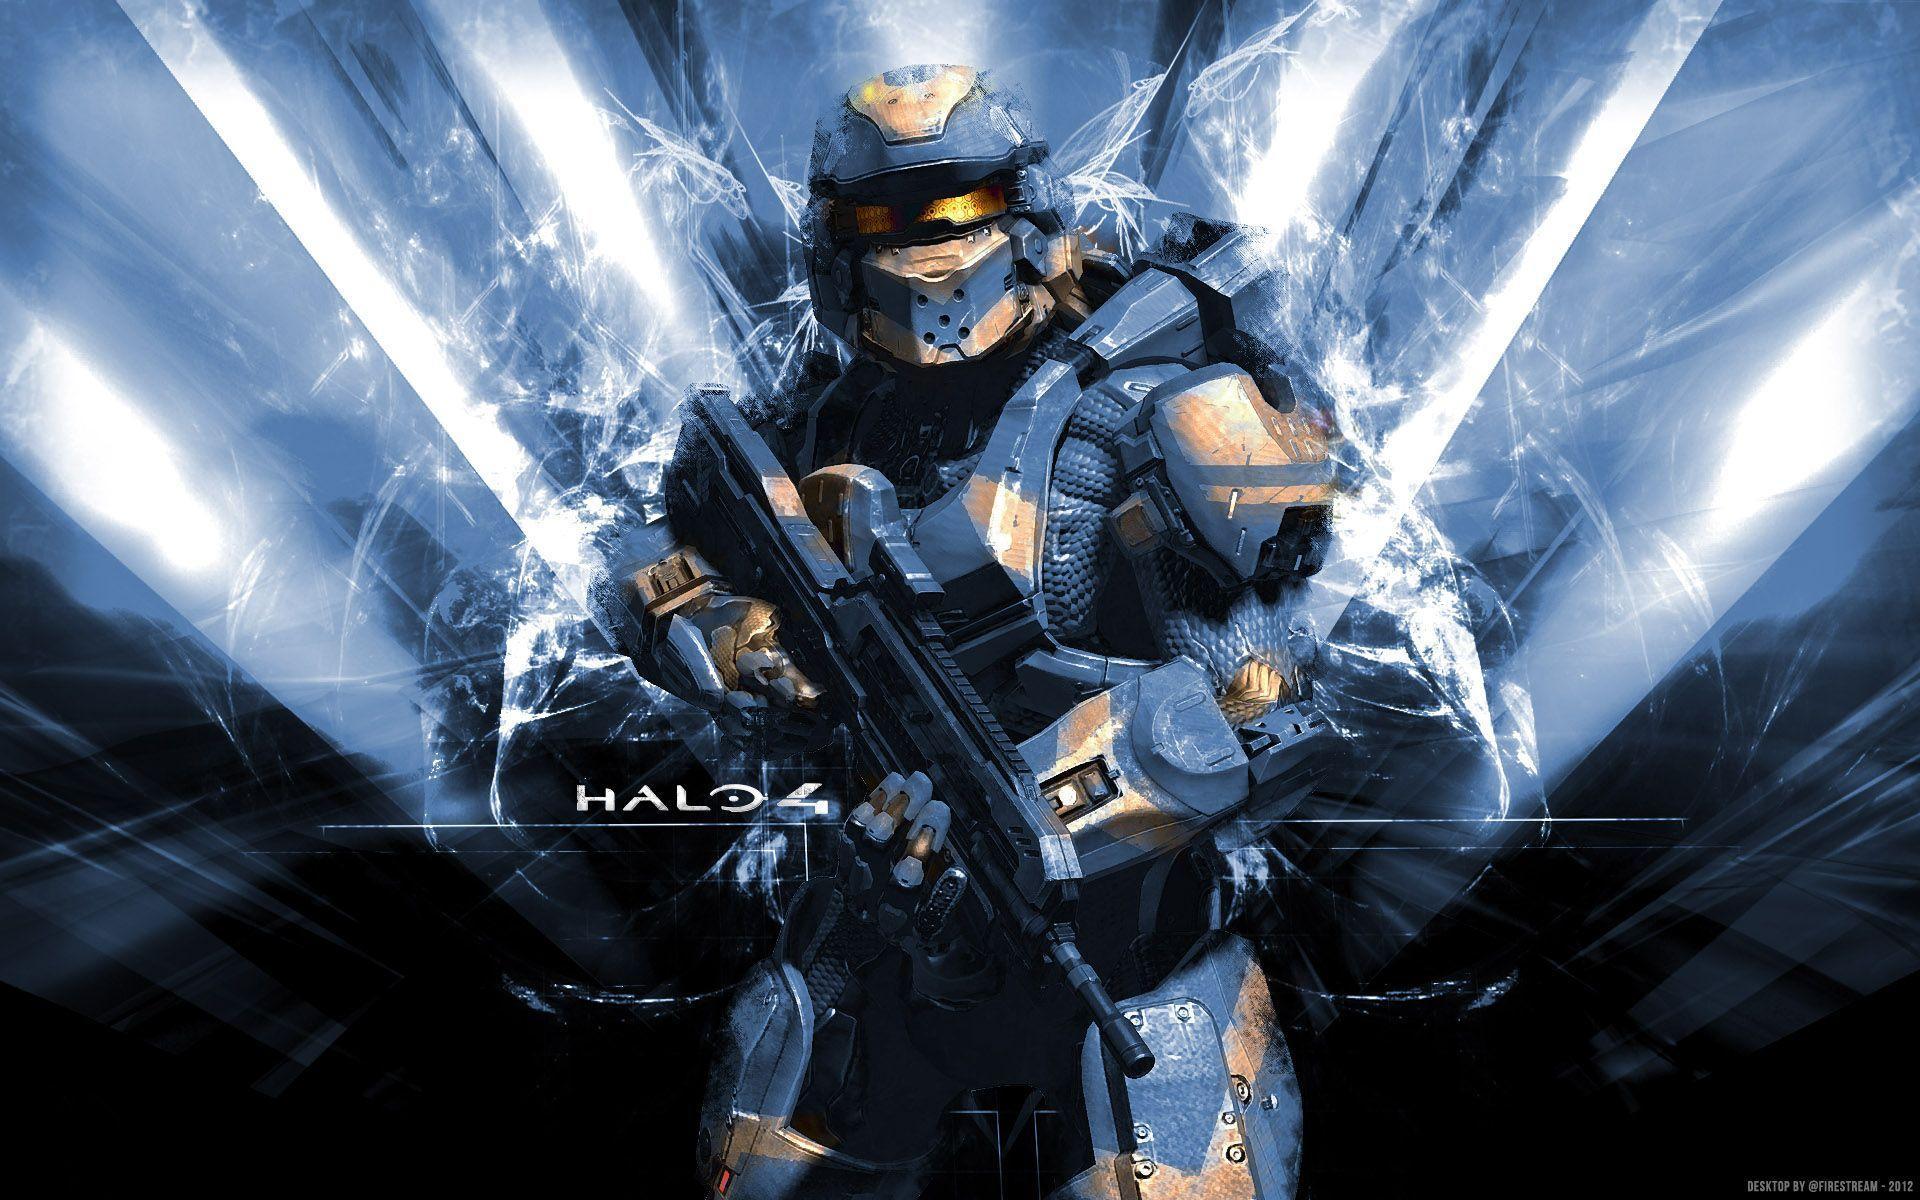 Cool Halo Backgrounds - Wallpaper Cave Halo Reach Elite Wallpaper.